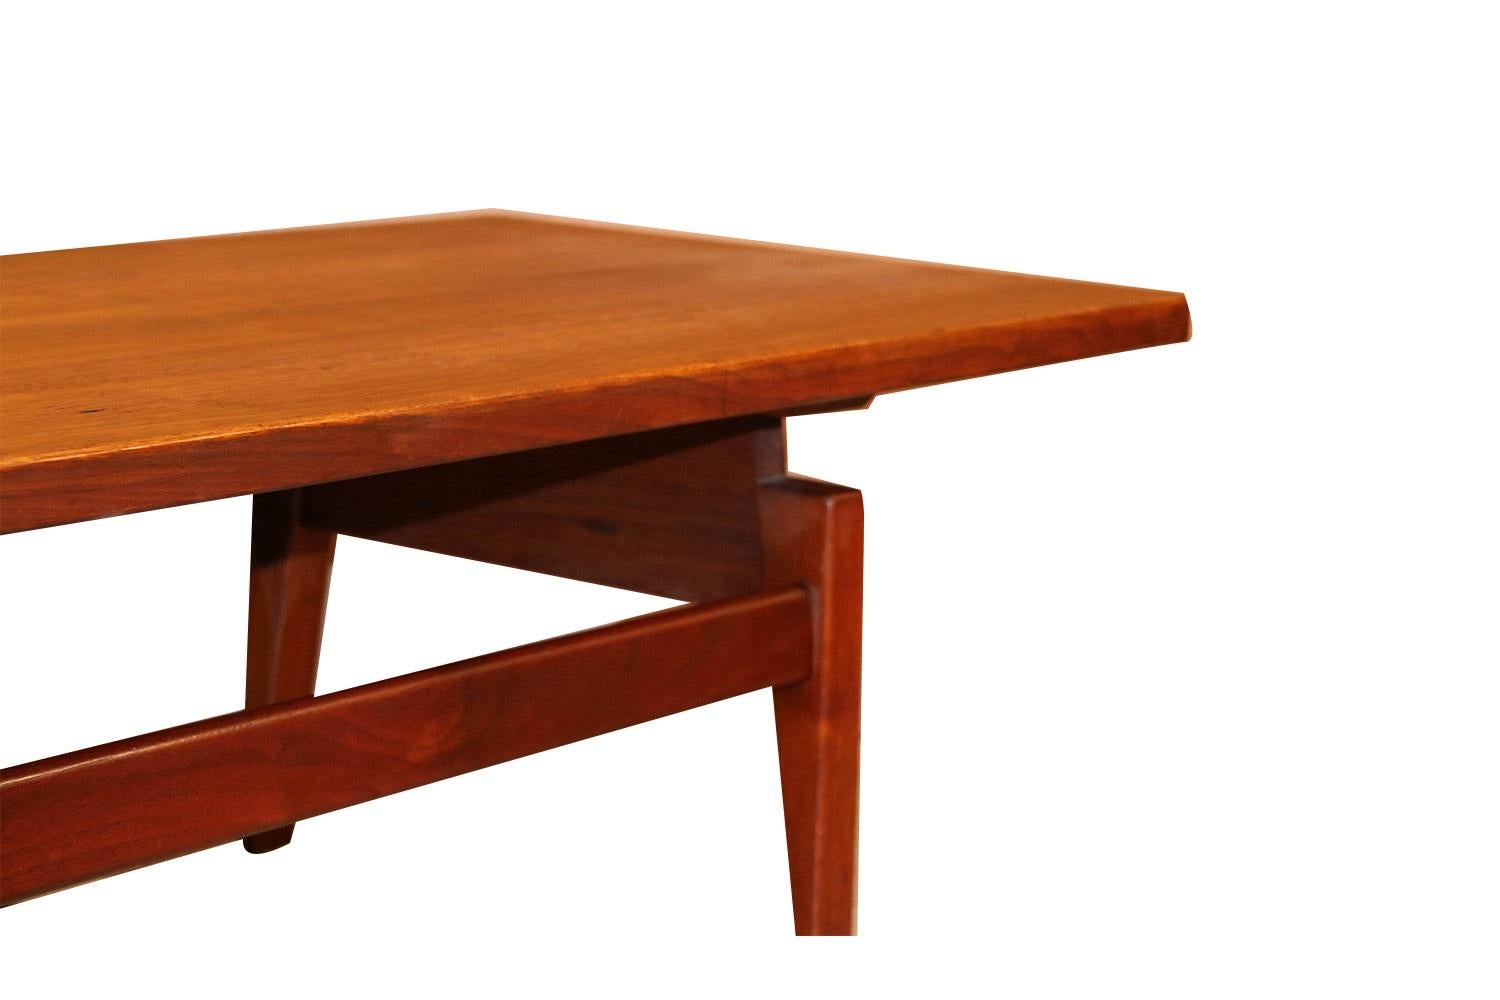 American Midcentury Jens Risom Floating Top Coffee Table Bench For Sale